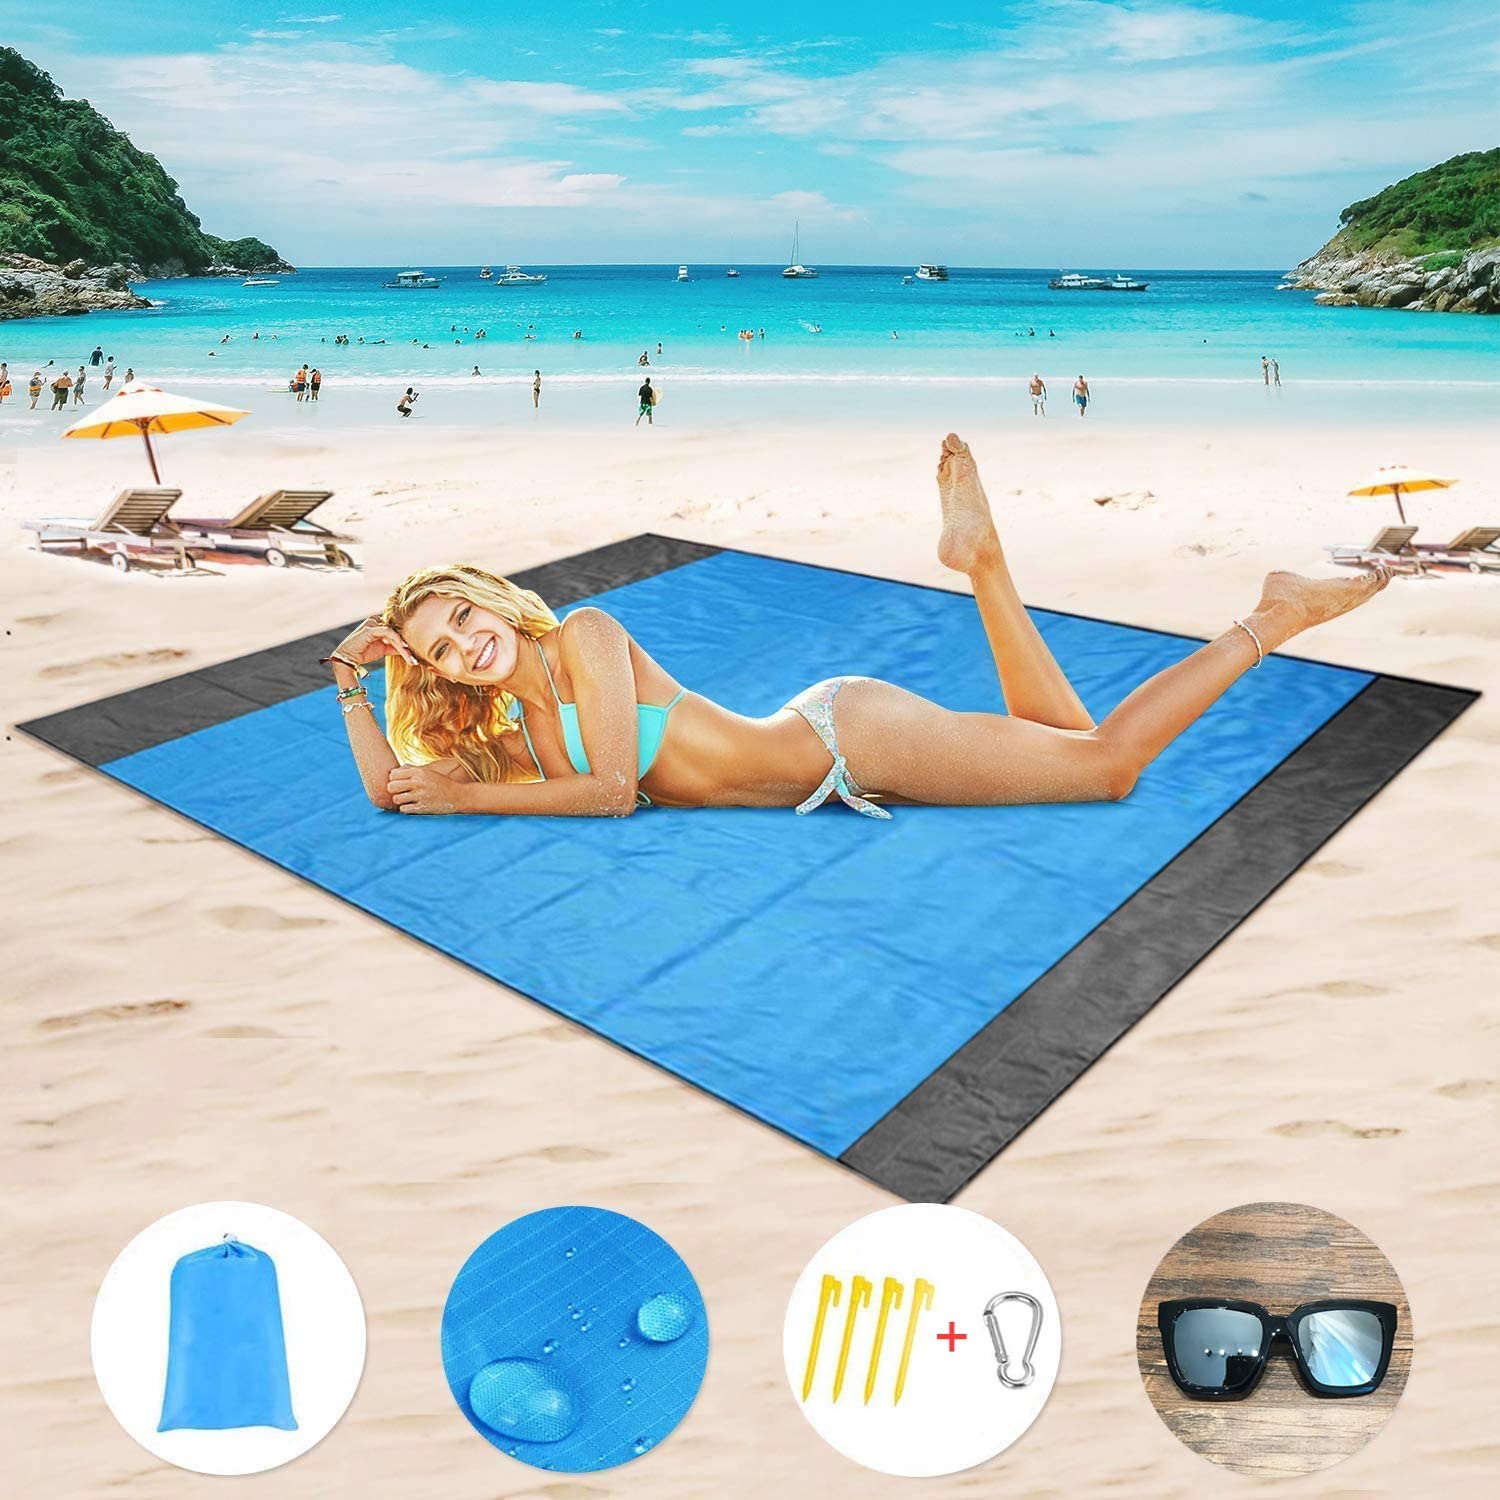 Kyhon Outdoor Beach Mat Picnic Blanket,Extra Large 210 x 200cm Waterproof Portable Picnic Beach blanket,Sandproof with 4 Fixed Nails,Reinforced Edging for Beach,Park,Camping,Hiking & Family Concerts